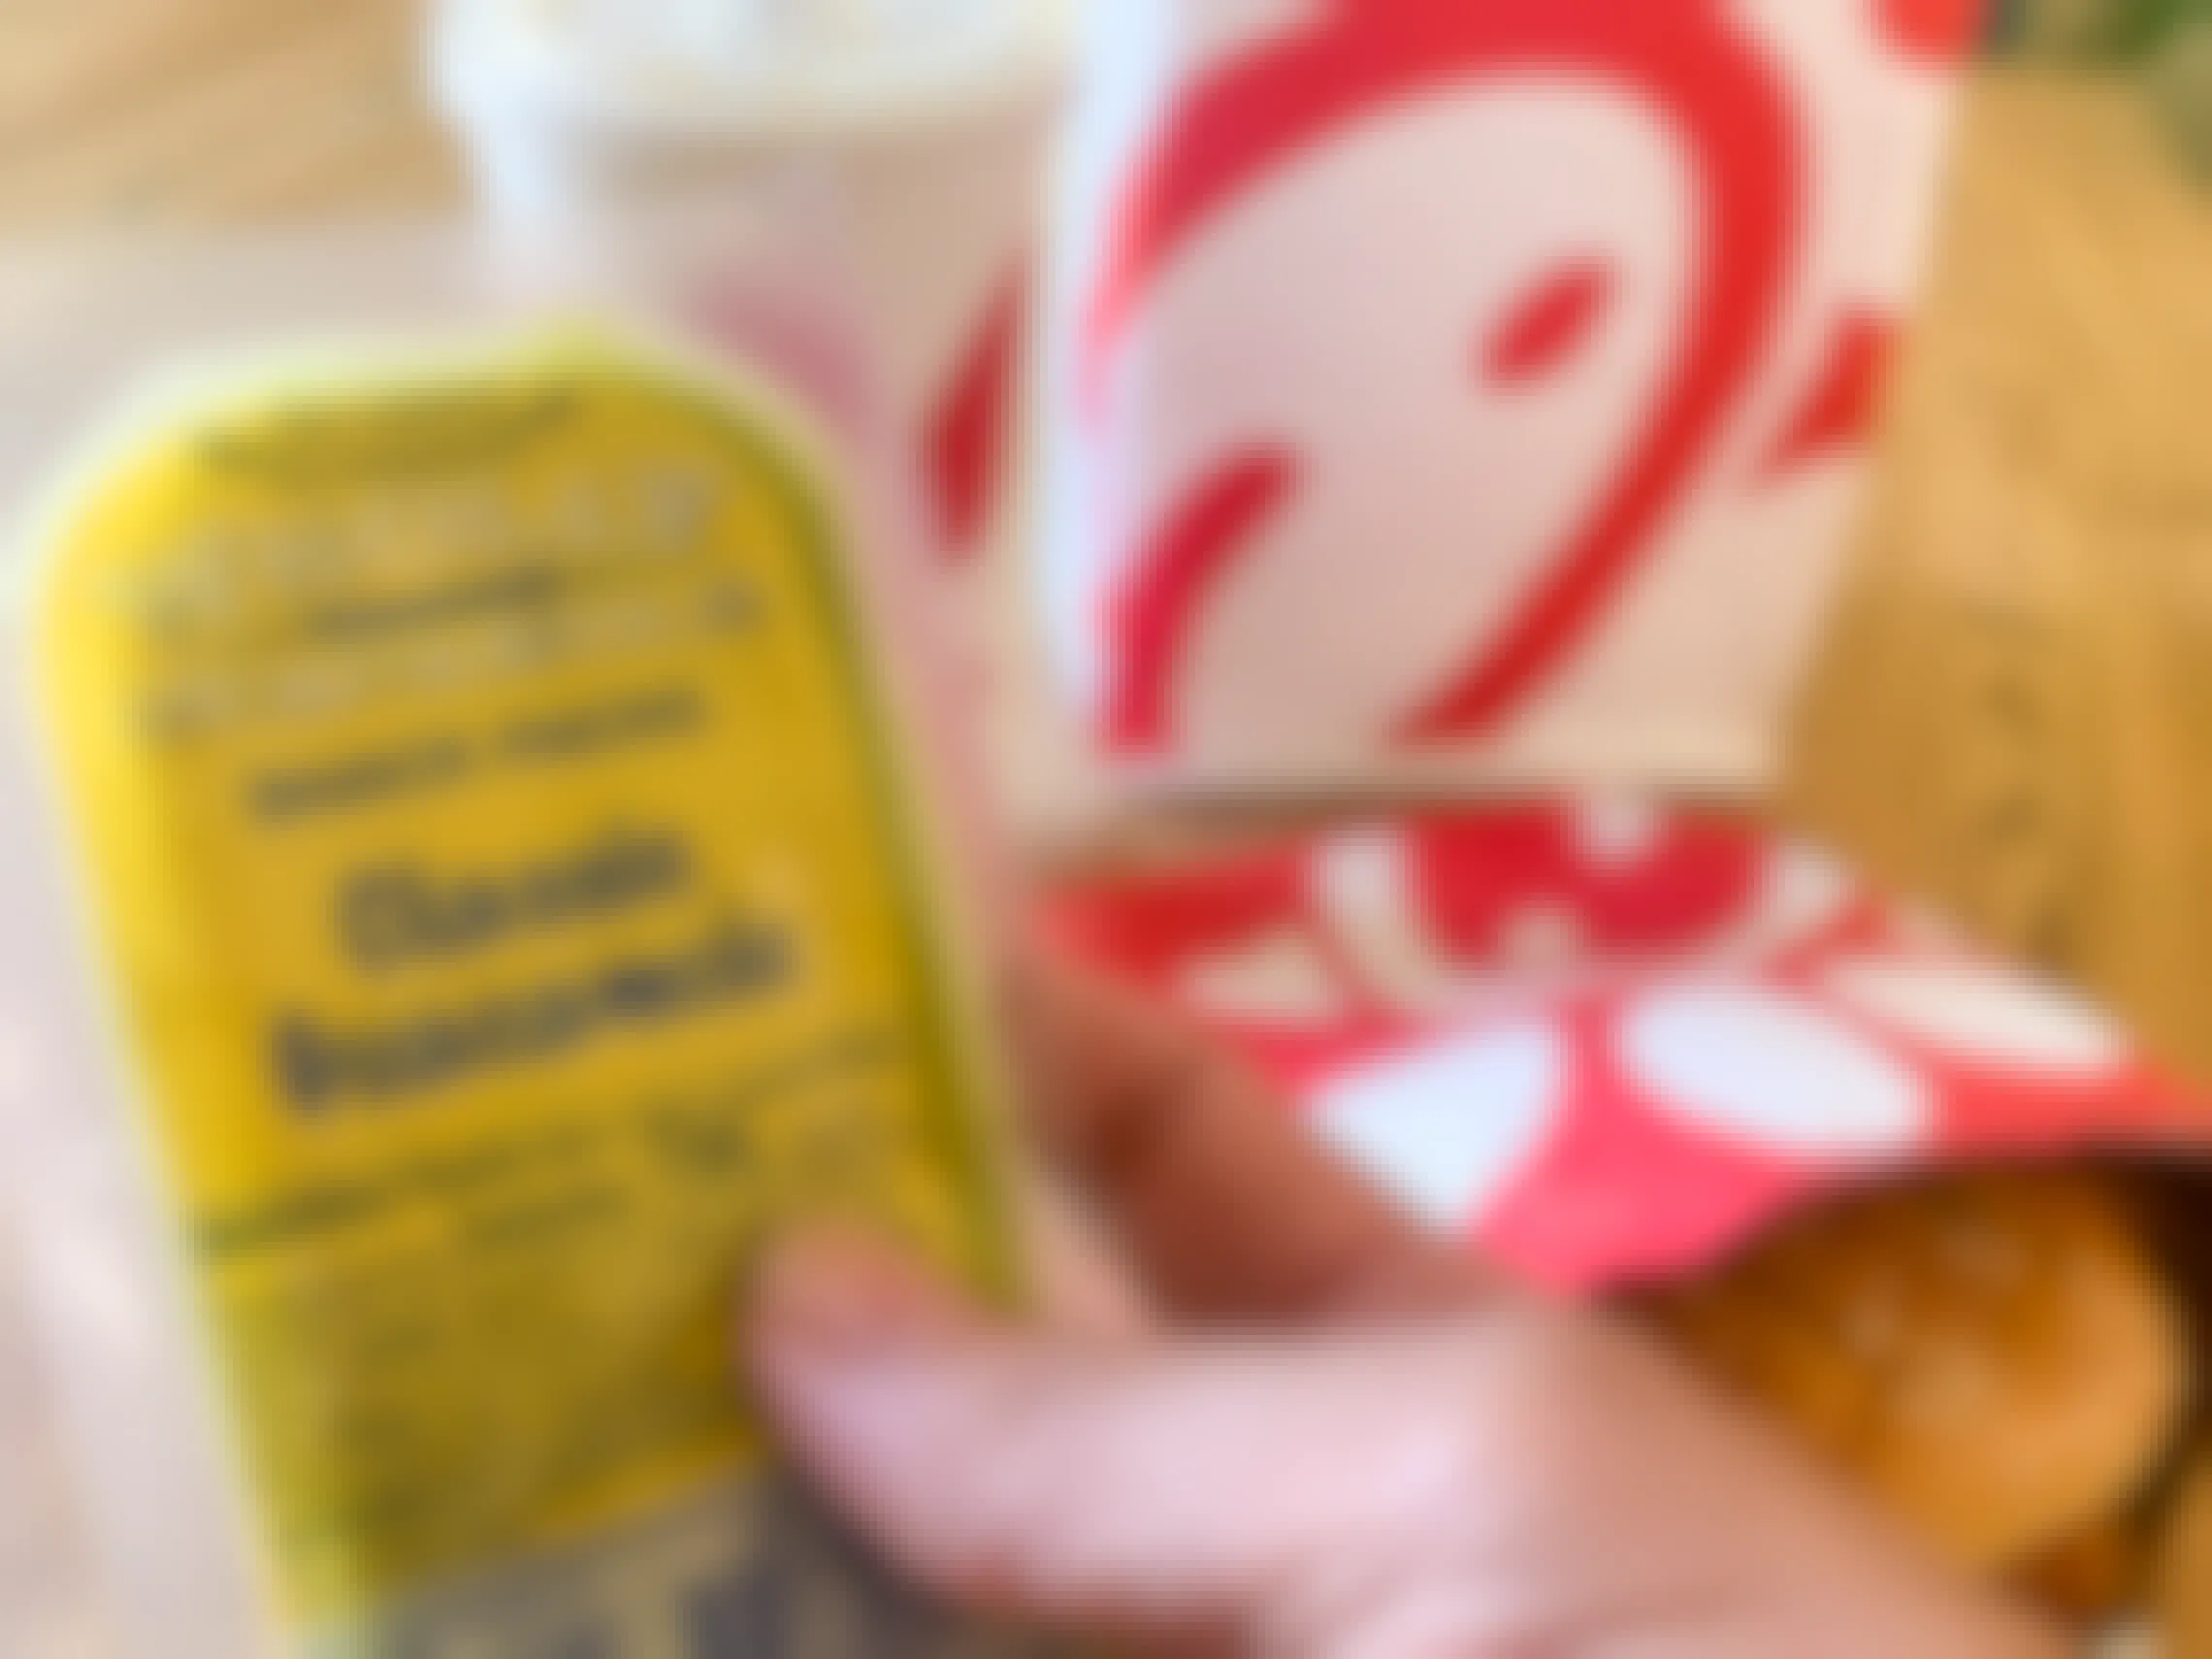 A person's hand holding a snack-pack-sized classic Guacamole next to a Chick-fil-A sandwich and drink.